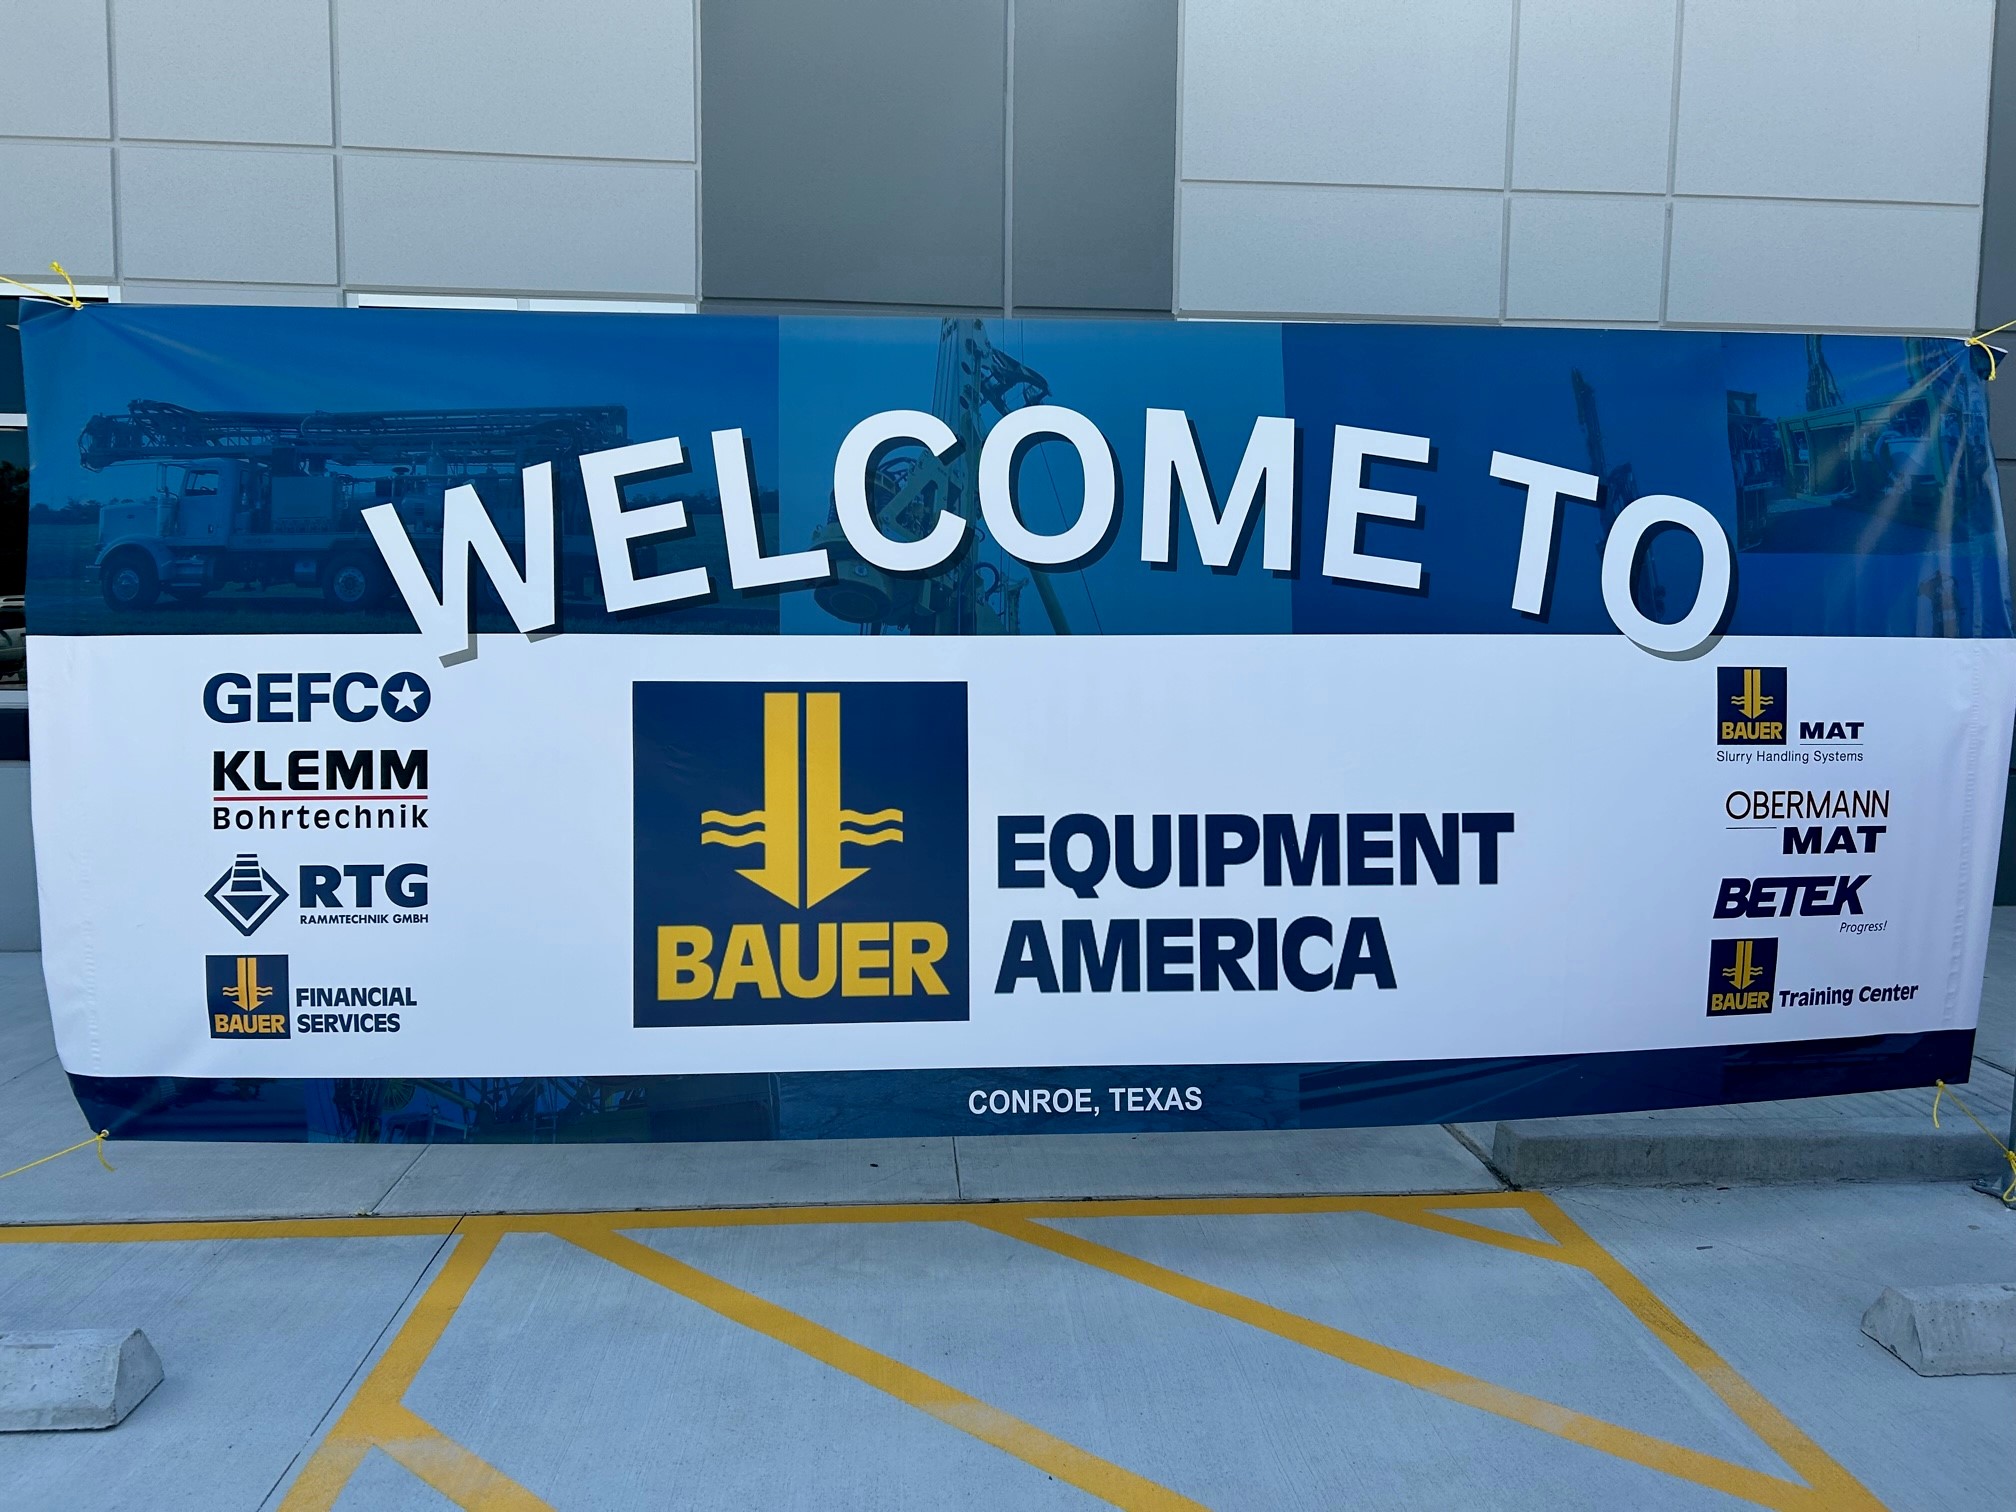 BAUER Equipment America Exemplifies How Room to Grow is Made Here Photo